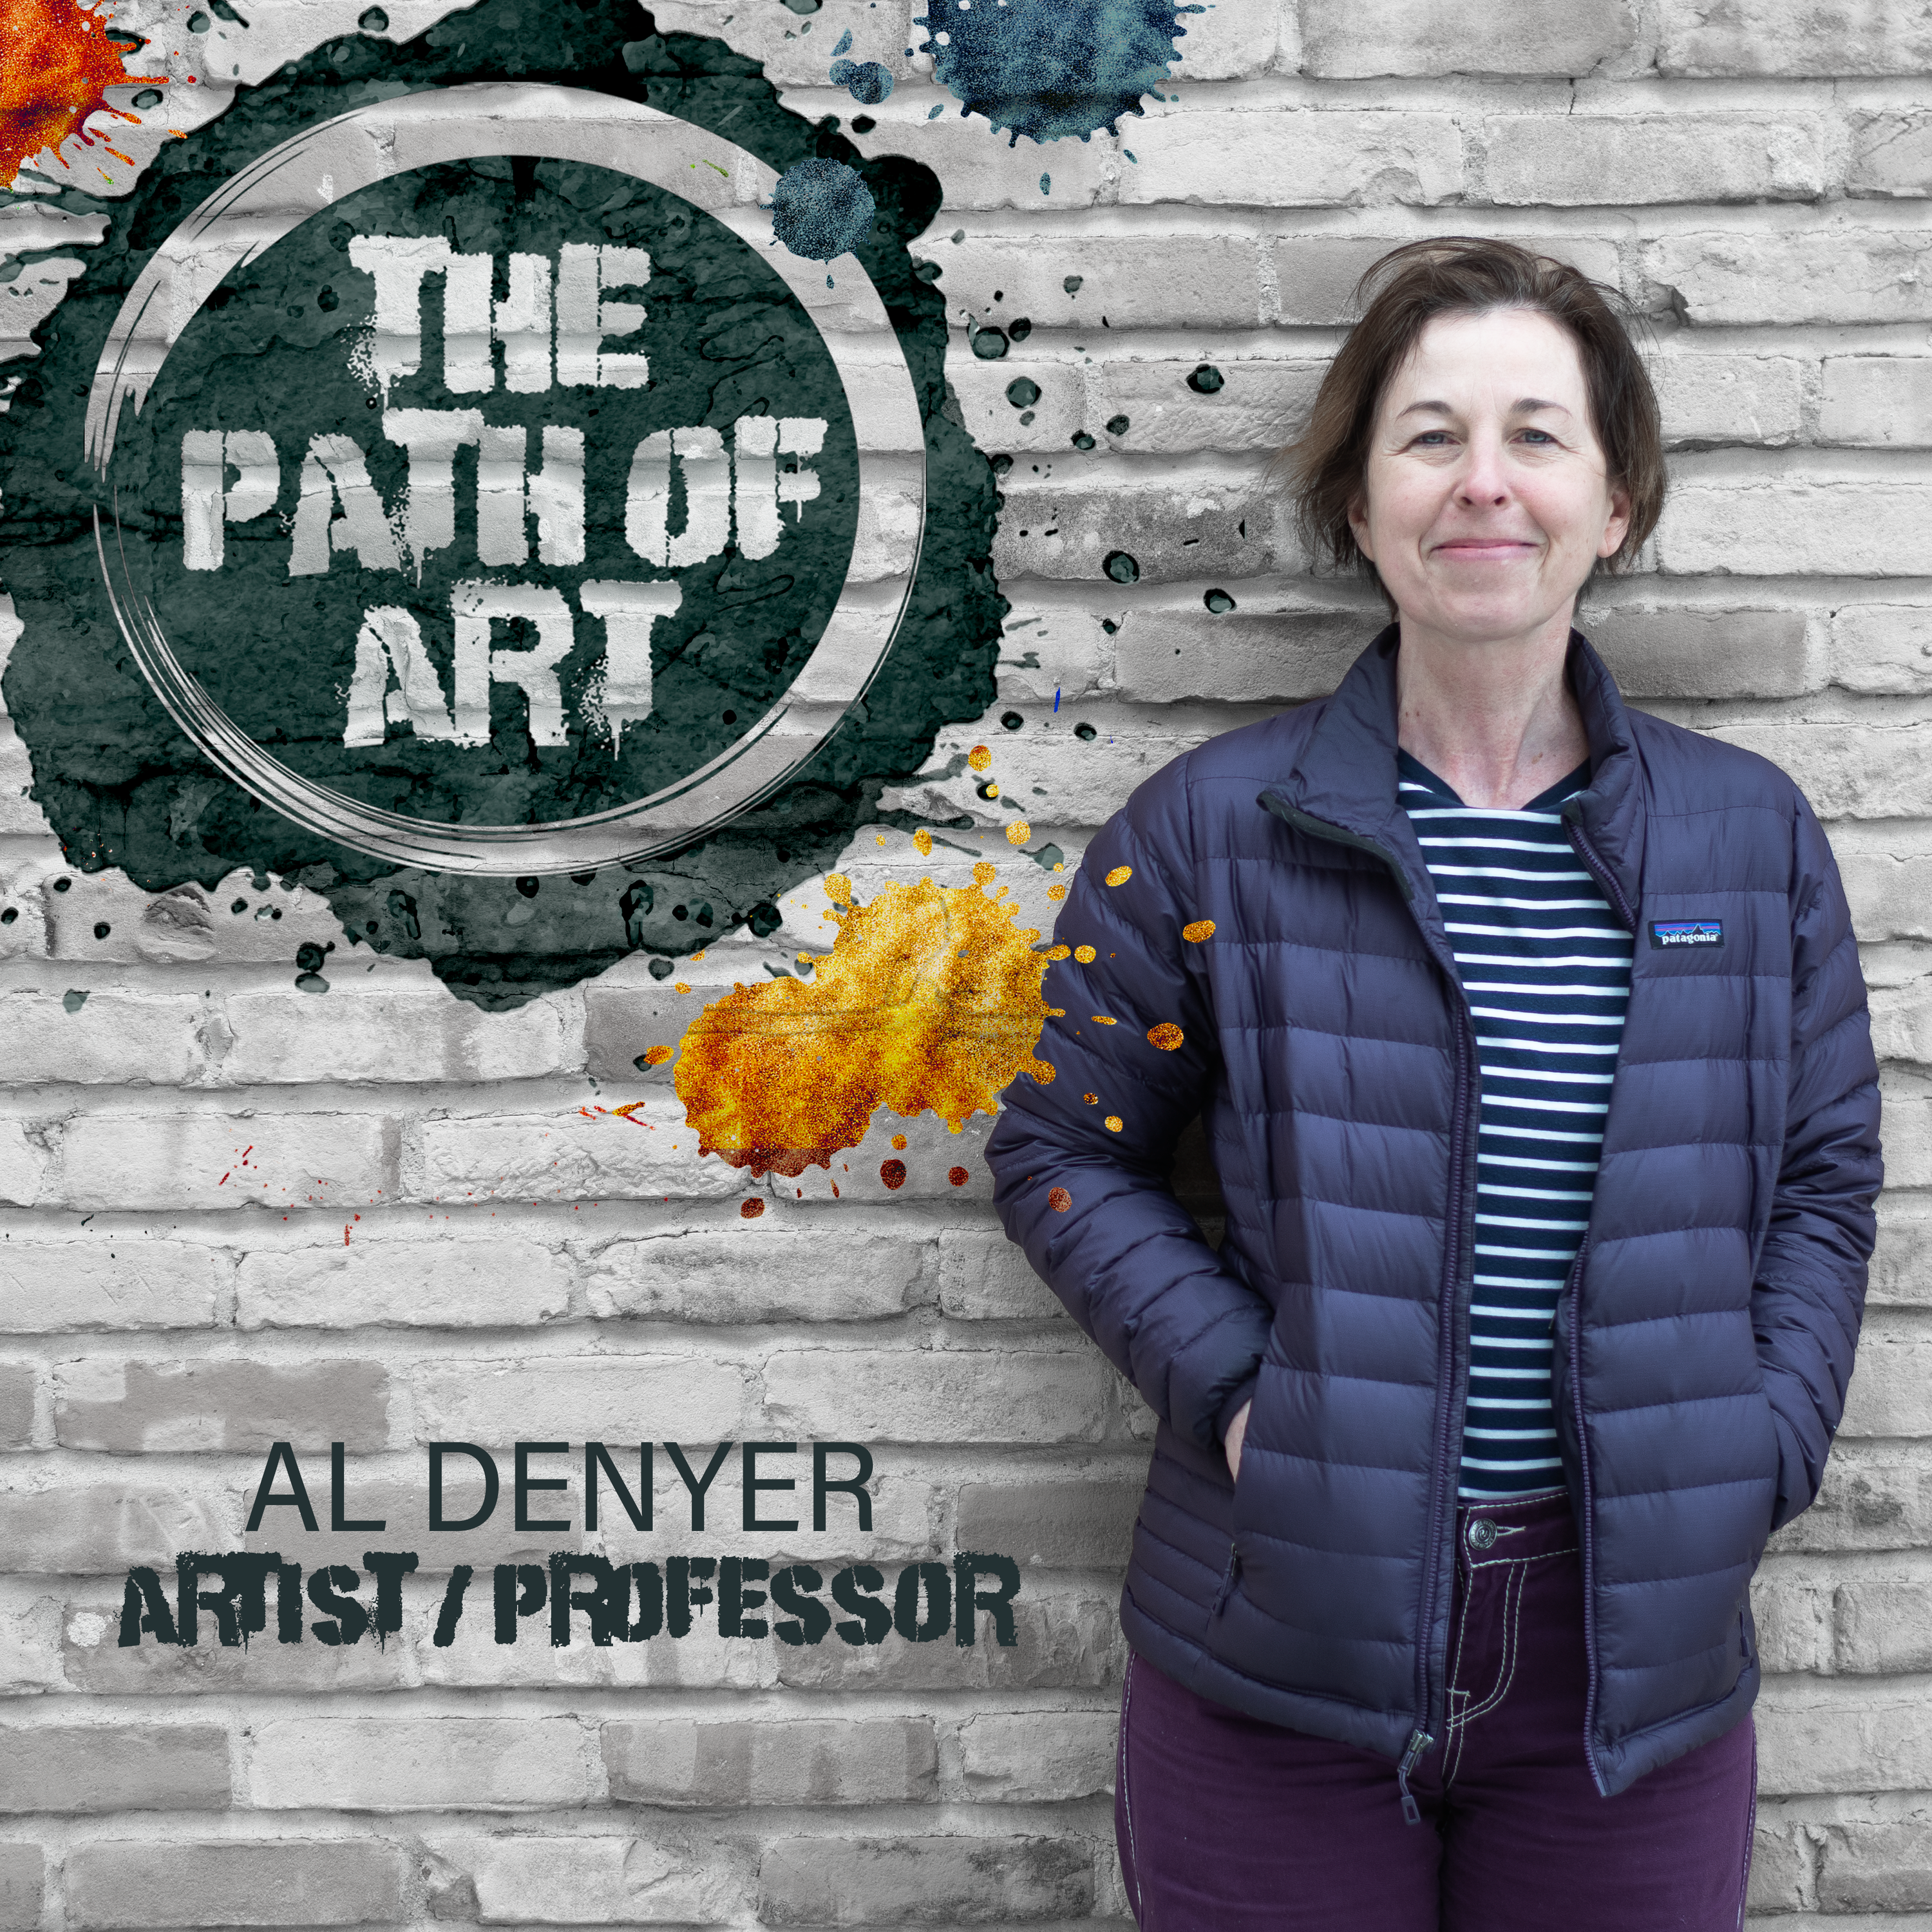 #19 Al Denyer: Educate others about the value of your art